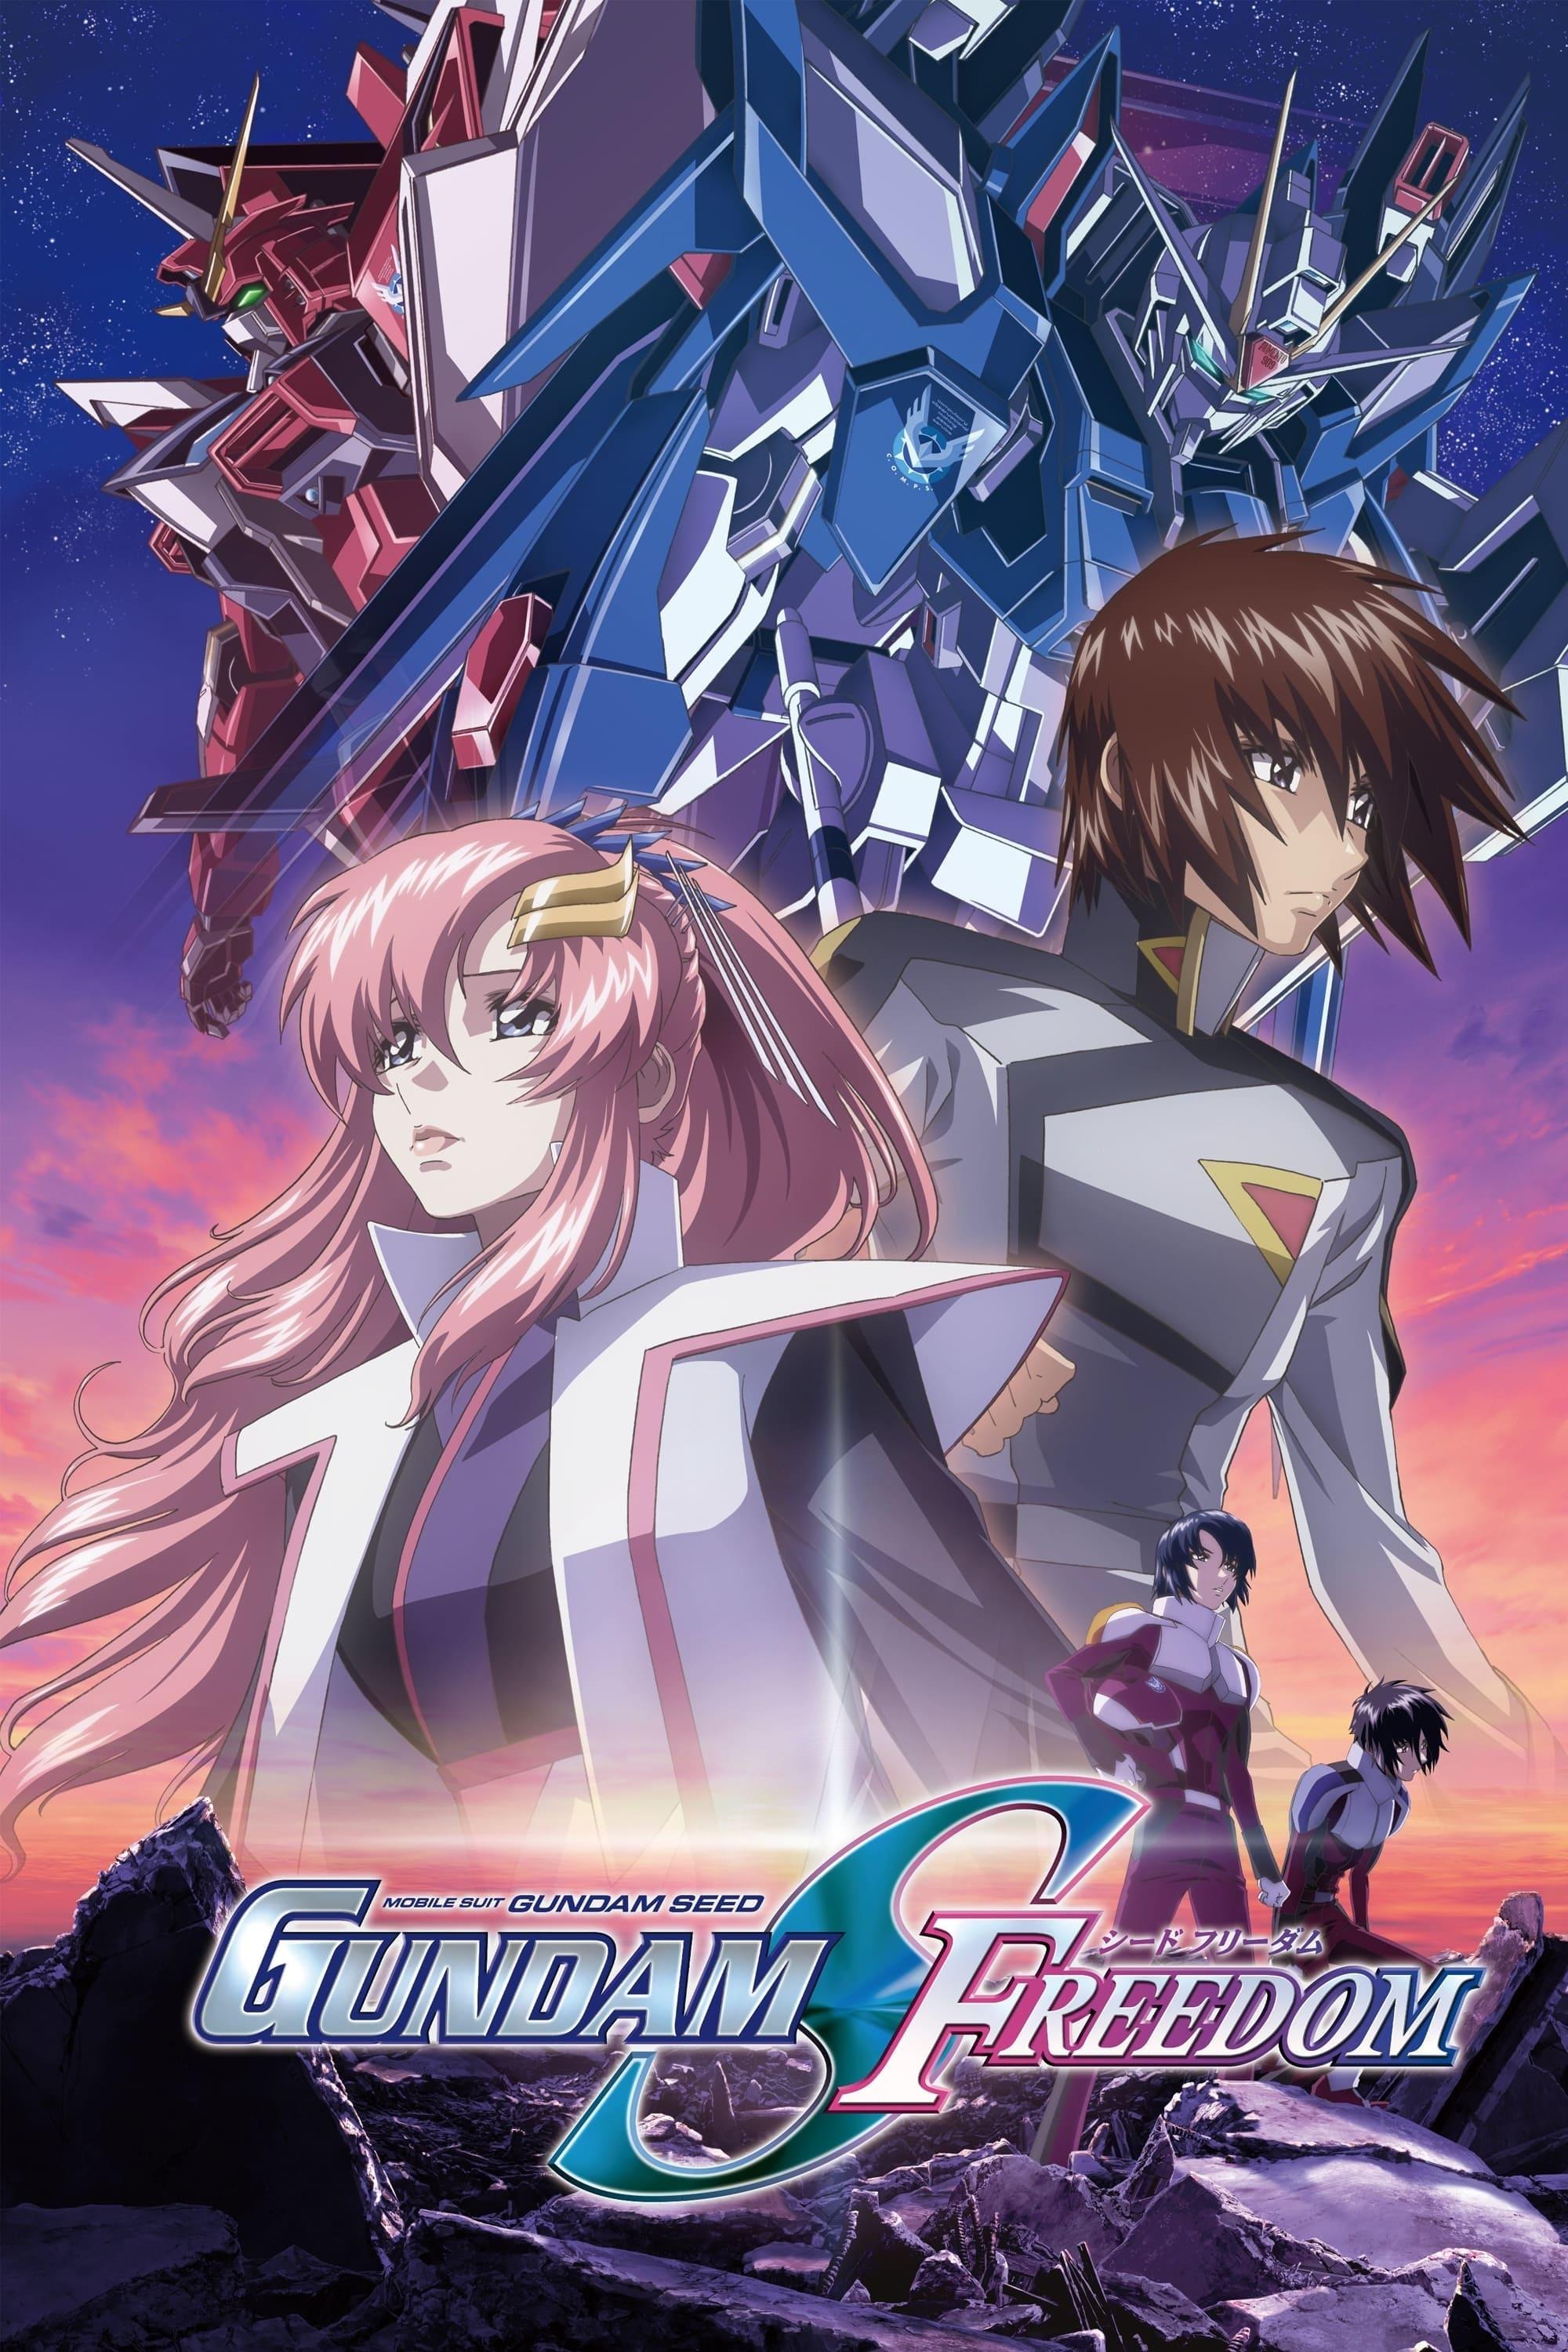 Movie poster of "Mobile Suit Gundam SEED FREEDOM"